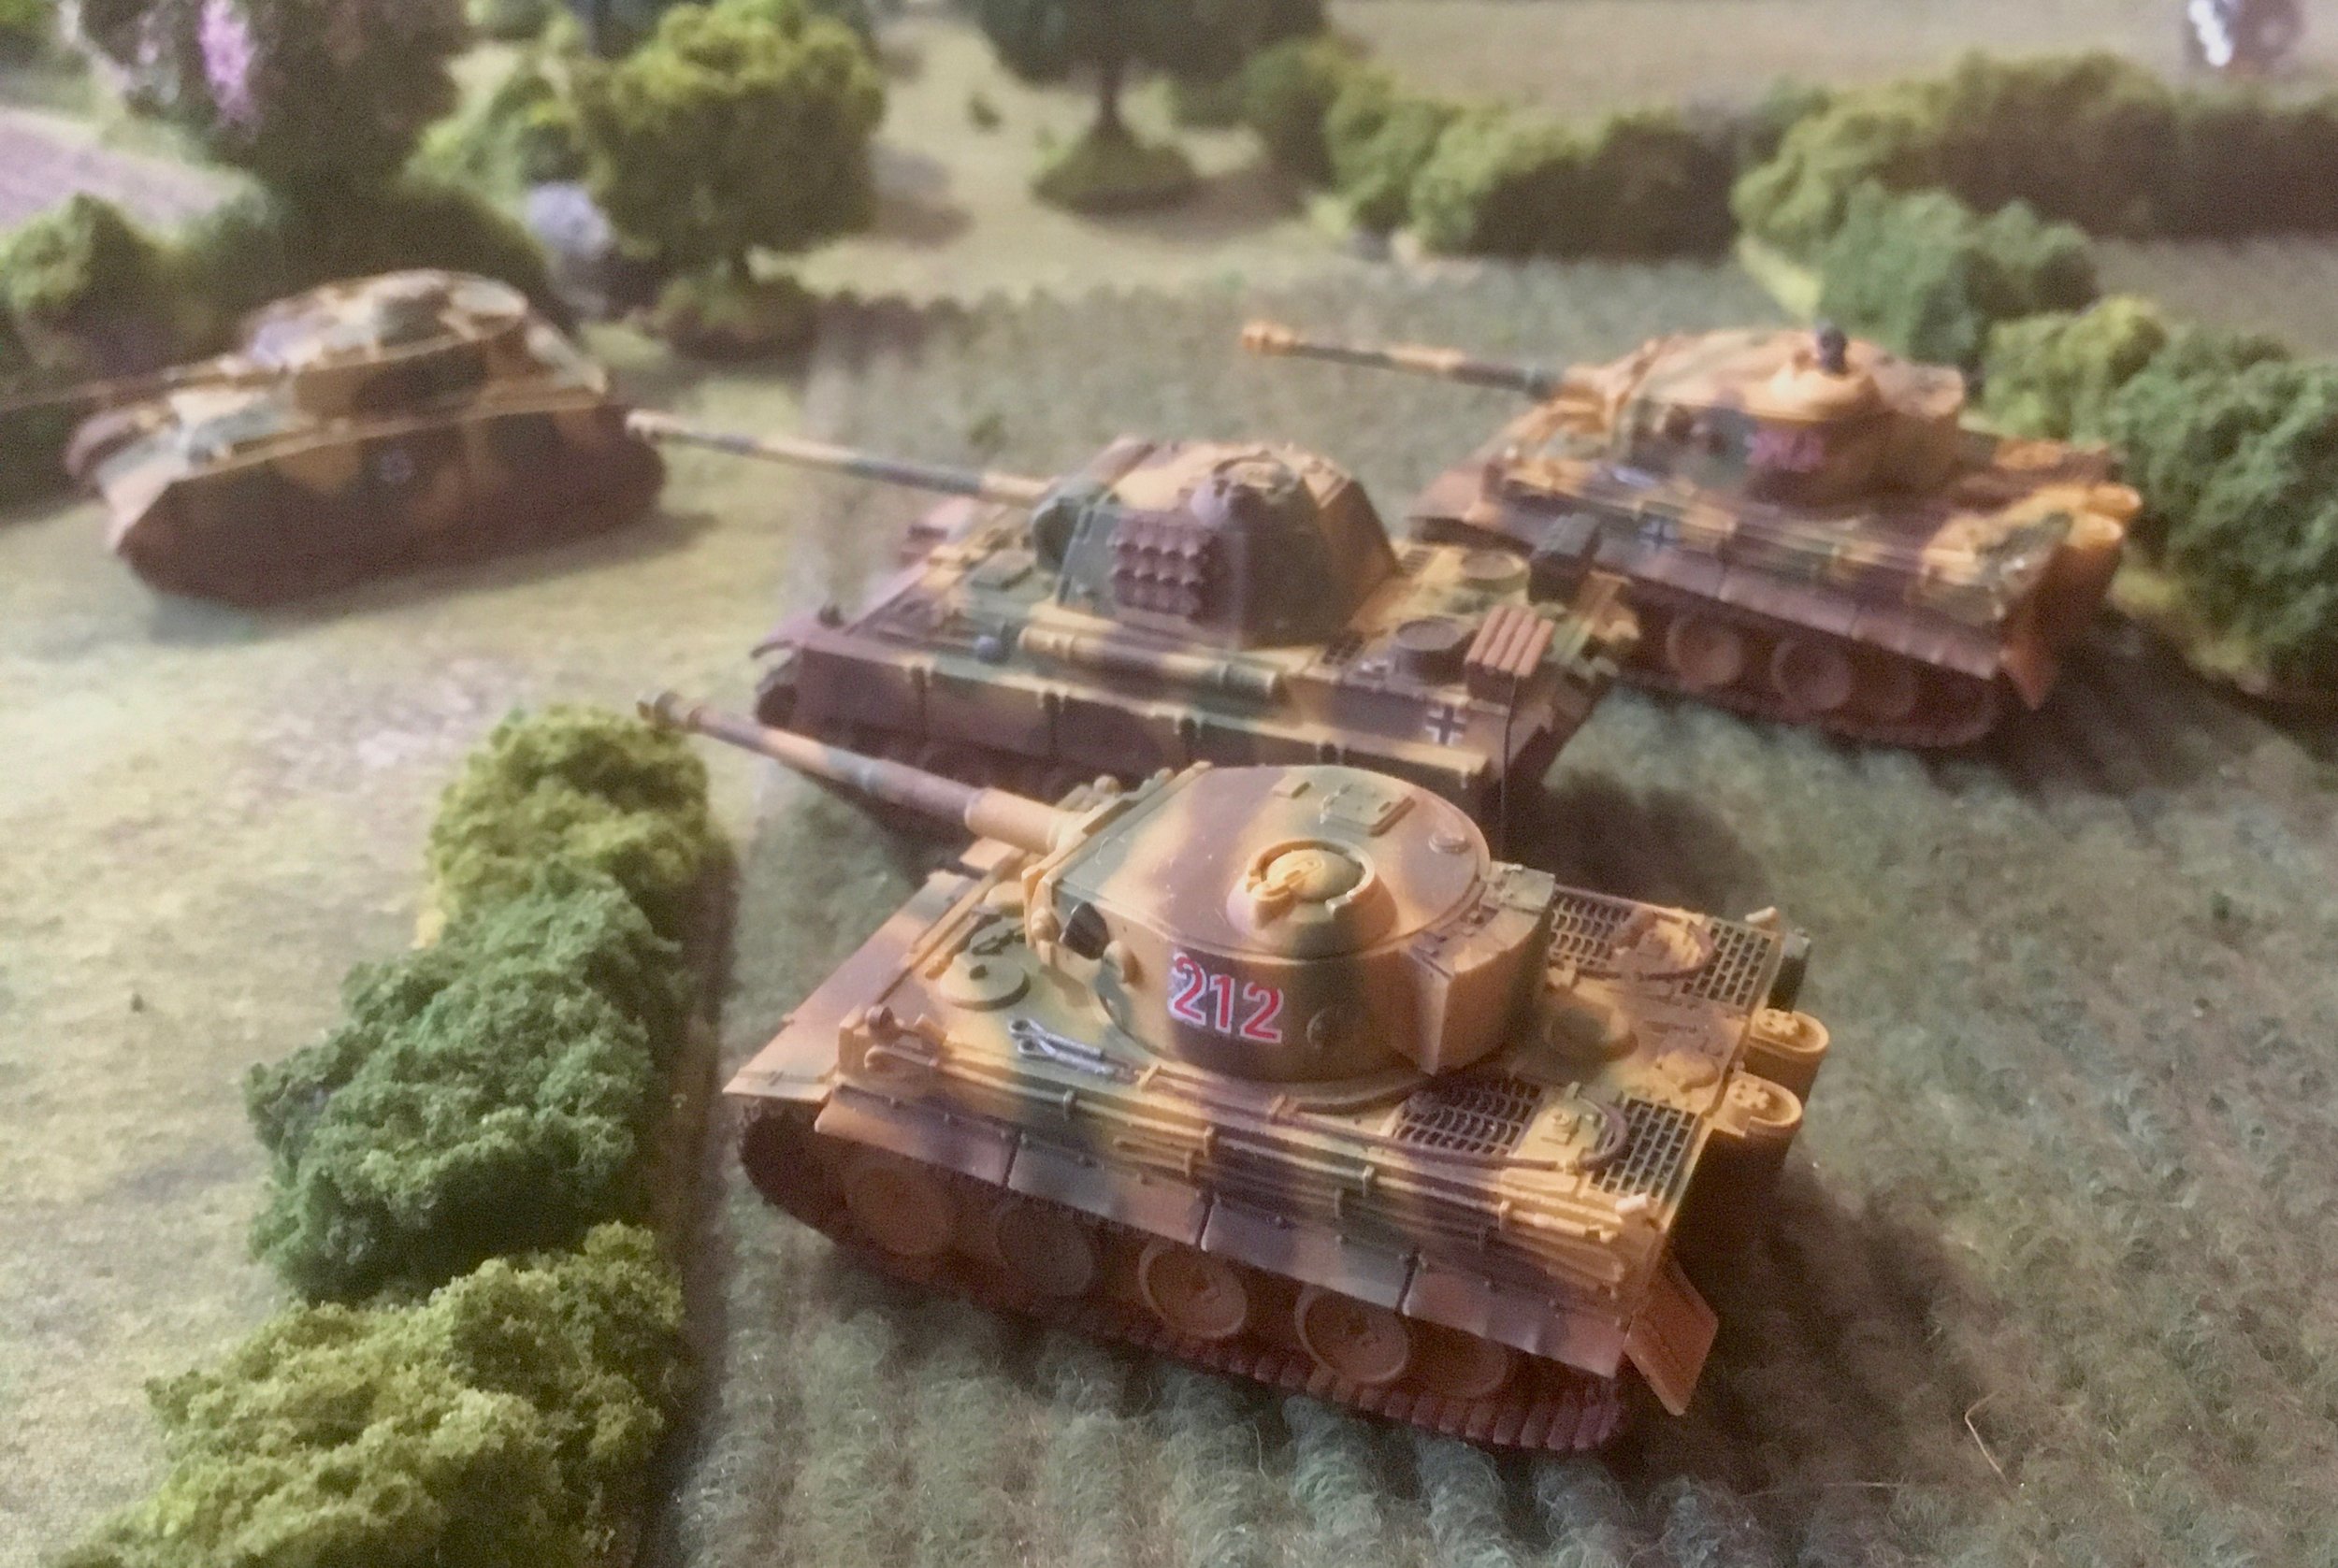 The fortunes of war then appeared to have changed for the Germans as more armour arrived in the form of a Panther and two Tiger I's.